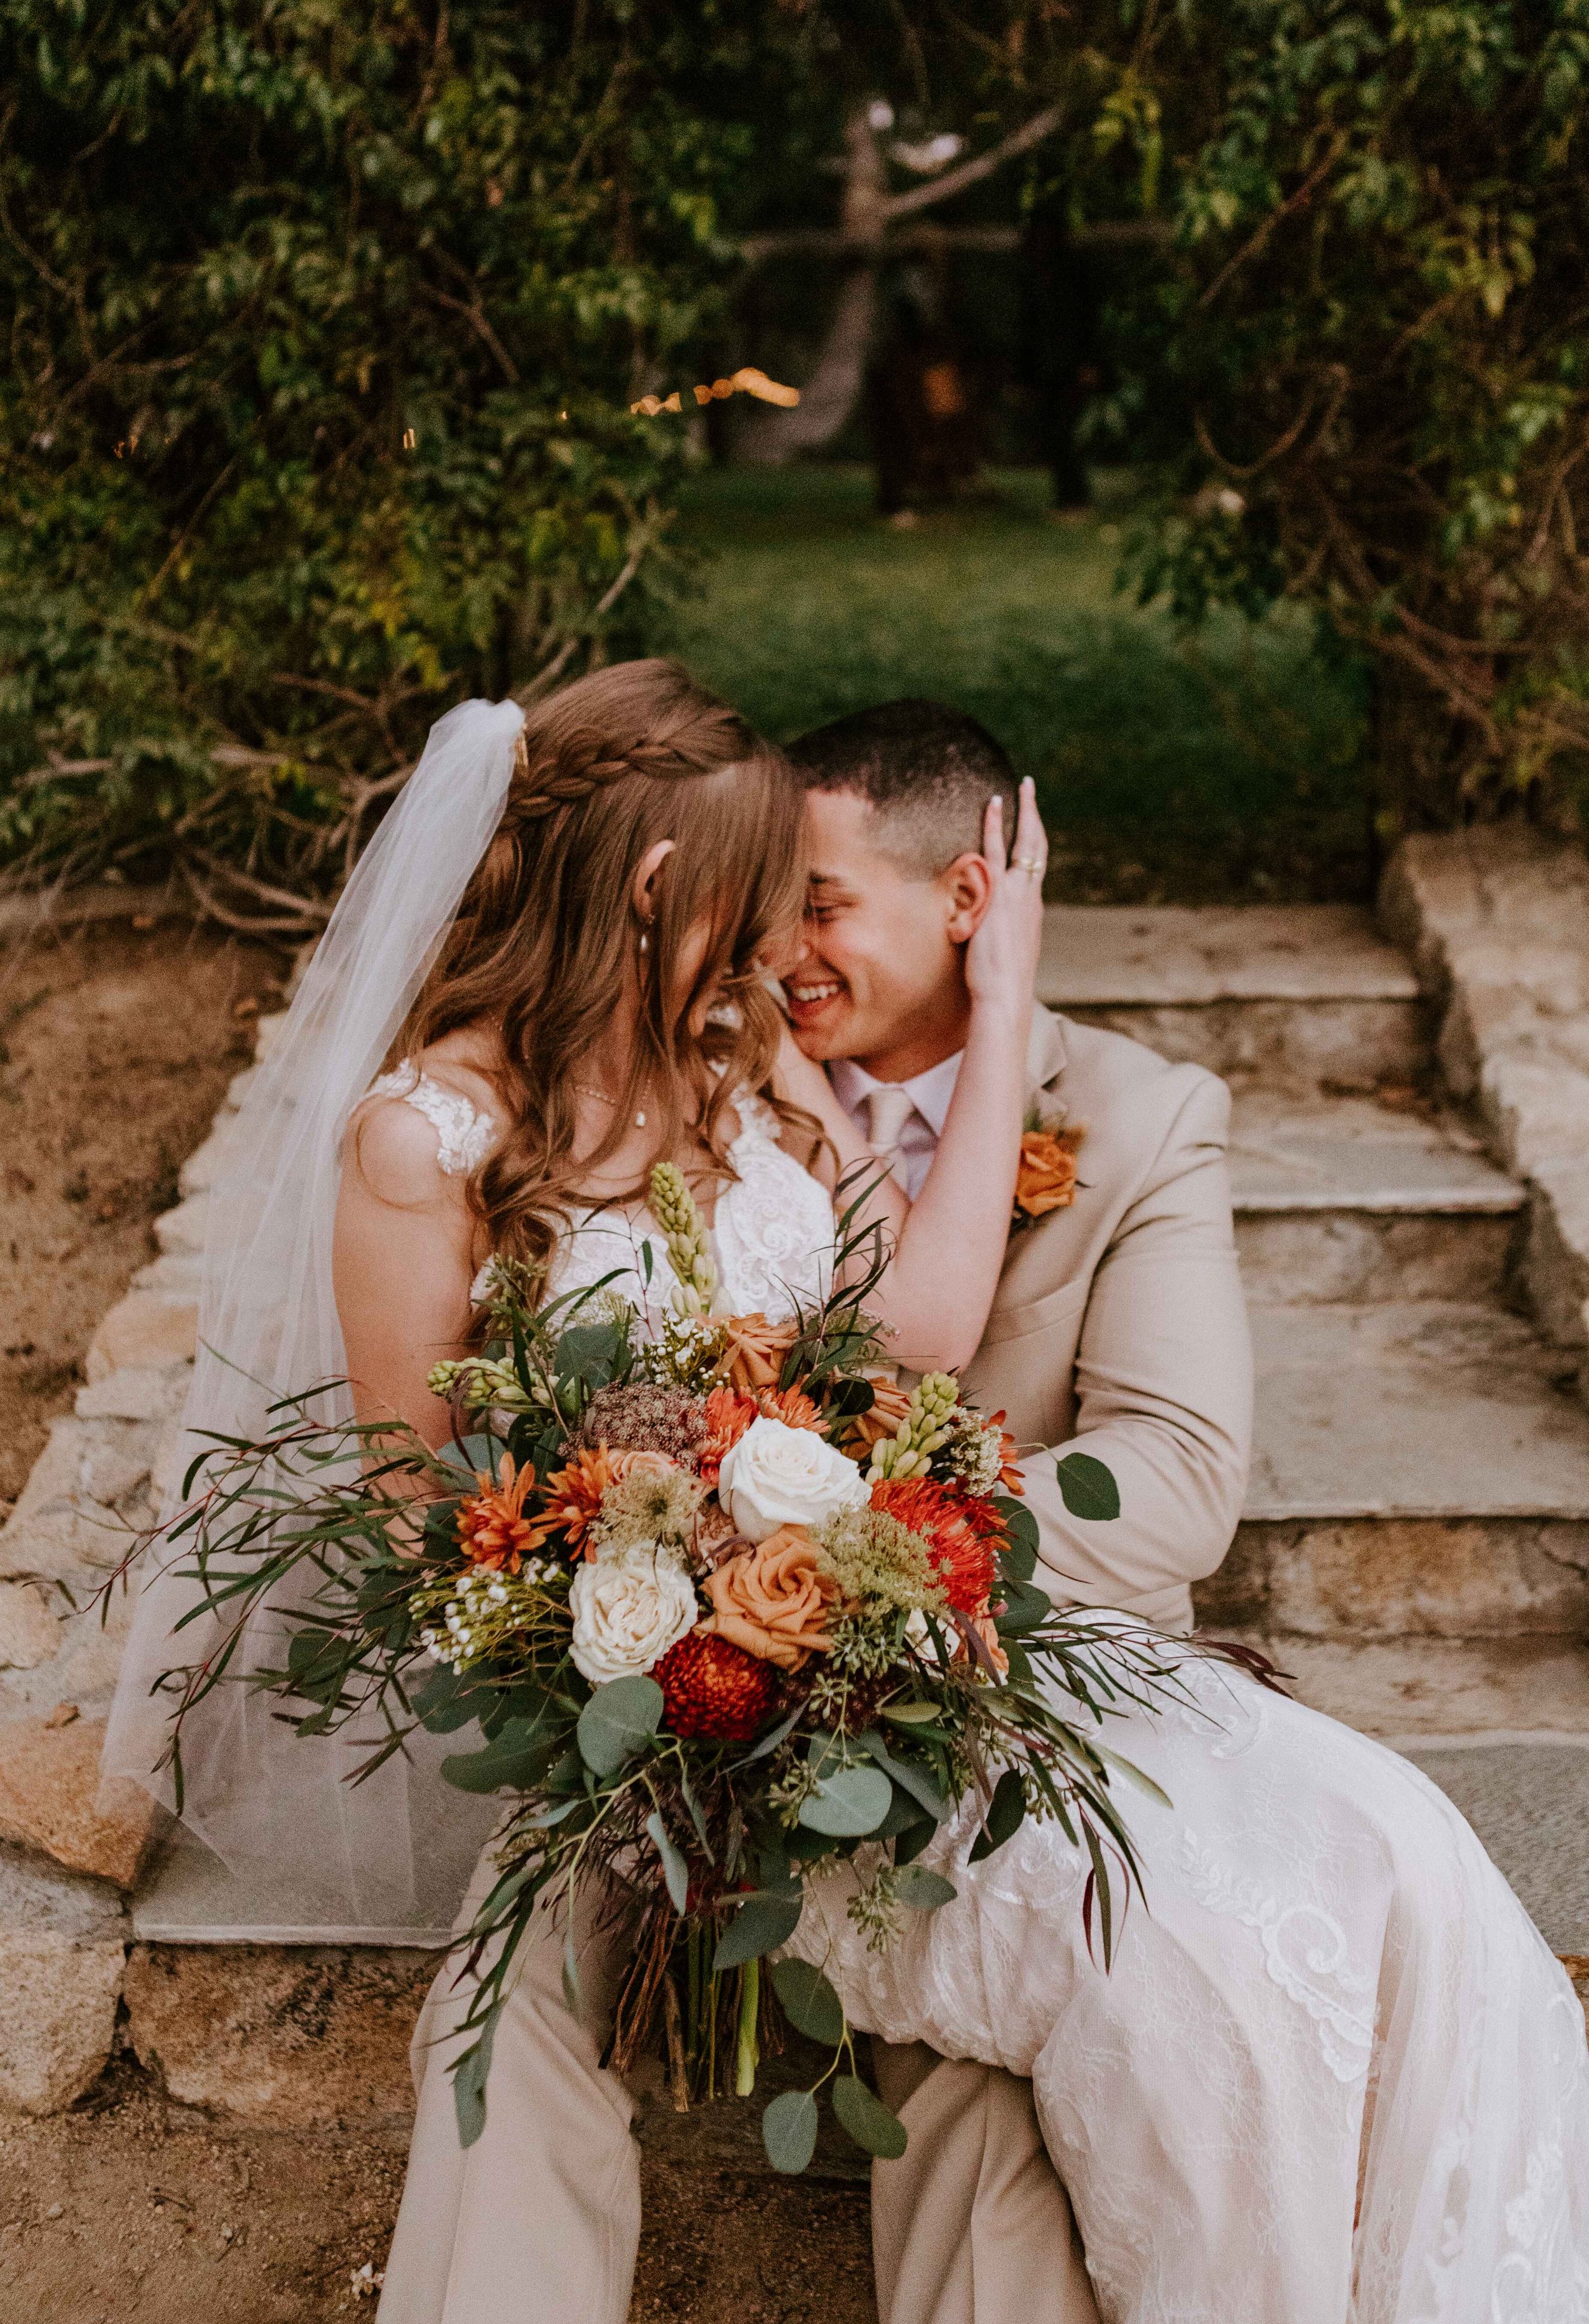 Secluded garden estate wedding in Pala, California sweet moment with bride and groom